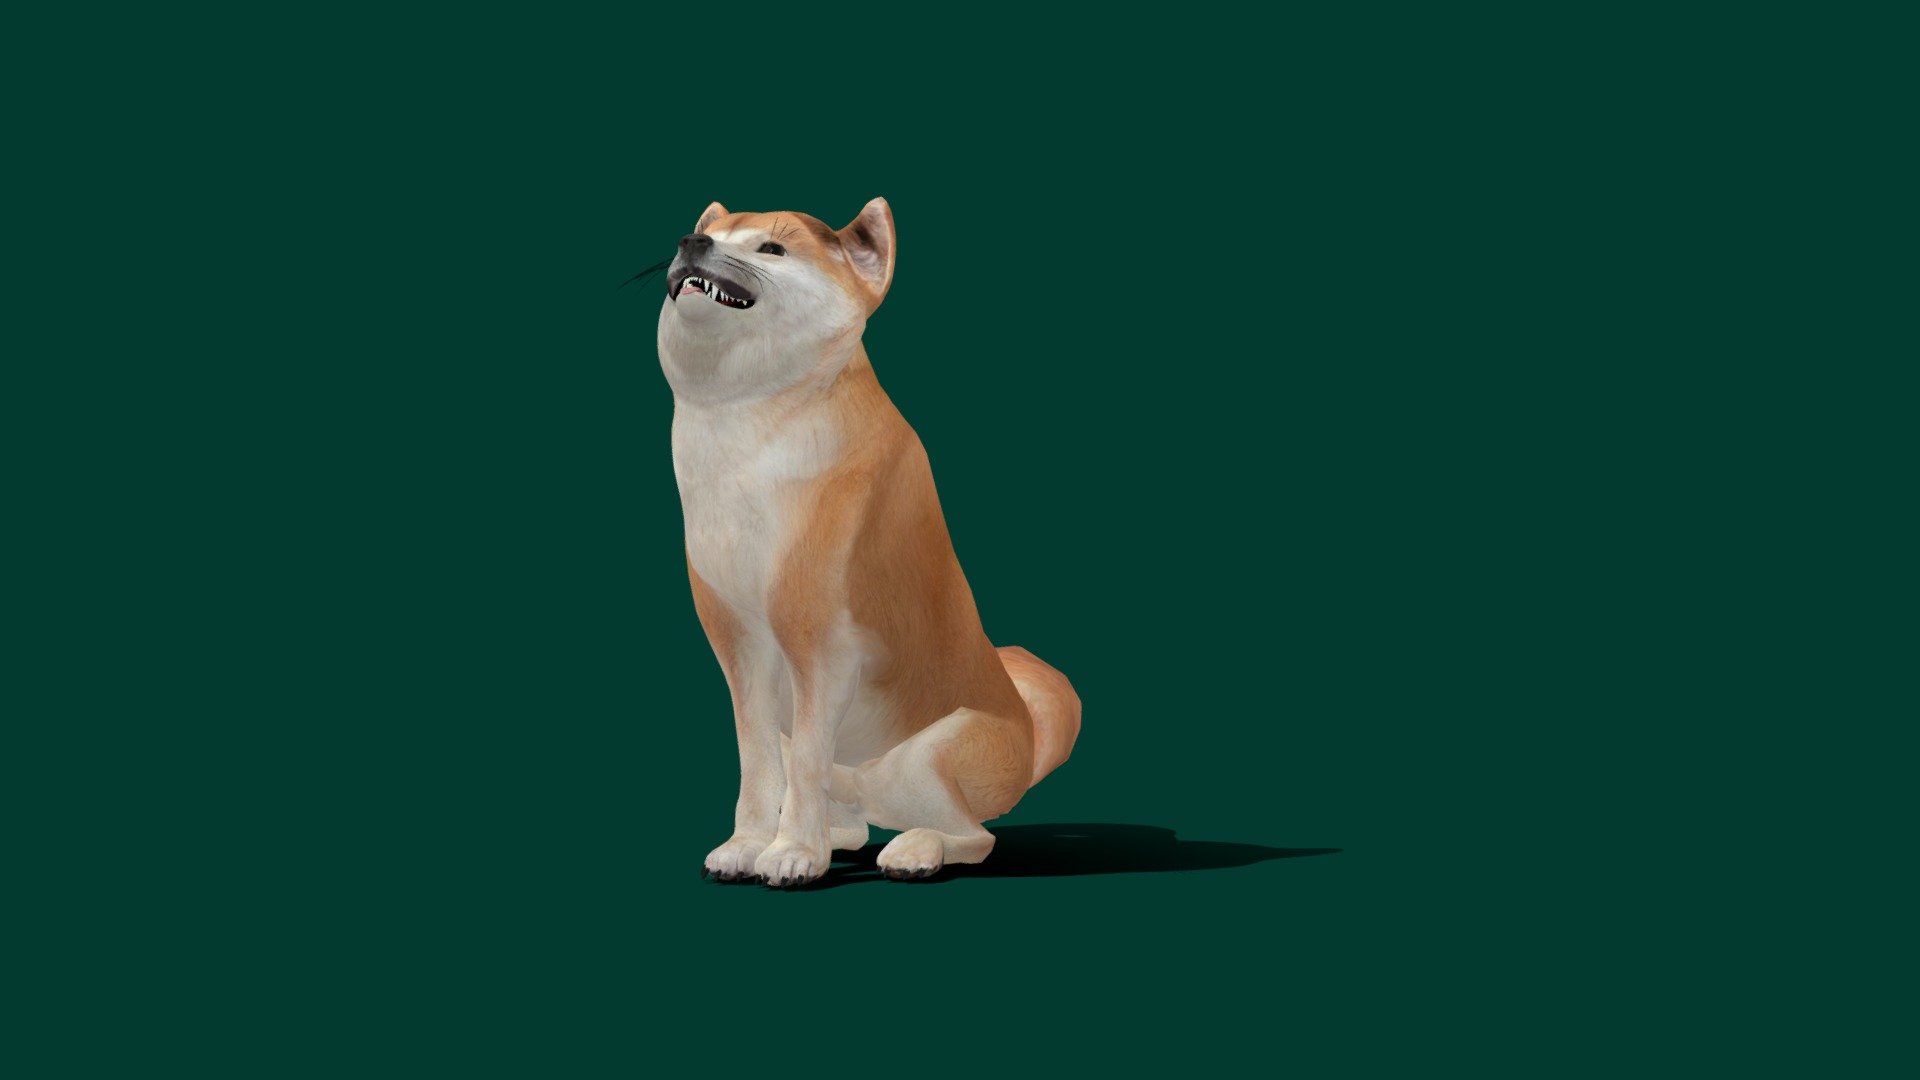 Playful dog model from microsoft app 3D model origin
i just update with different textures set PBR all set .

The Shiba Inu is a breed of hunting dog from Japan. A small-to-medium breed, it is the smallest of the six original and distinct spitz breeds of dog native to Japan. Its name literally translates to &ldquo;brushwood dog